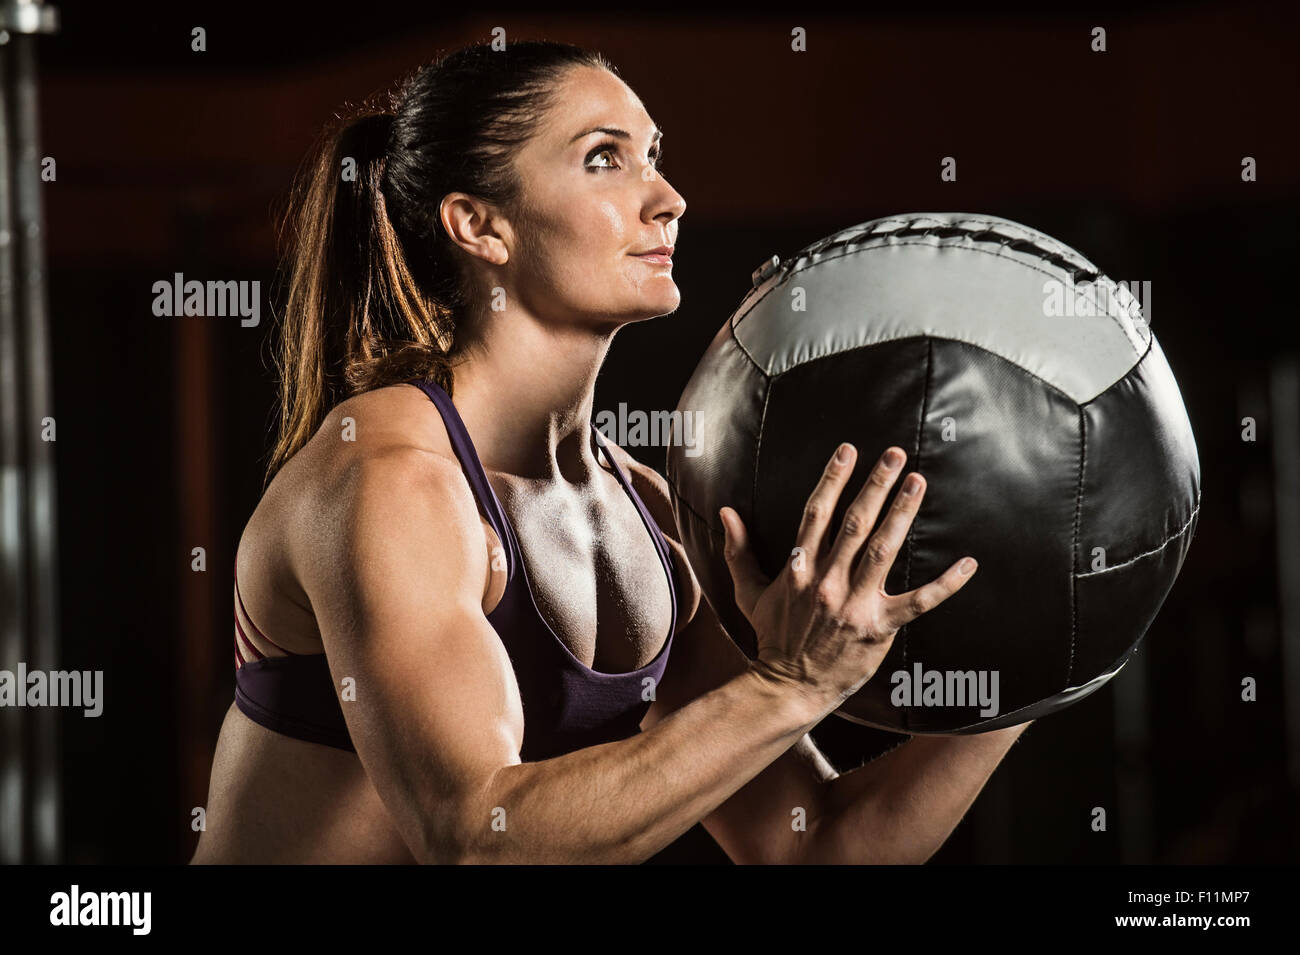 Caucasian athlete lifting resistance ball in gym Stock Photo